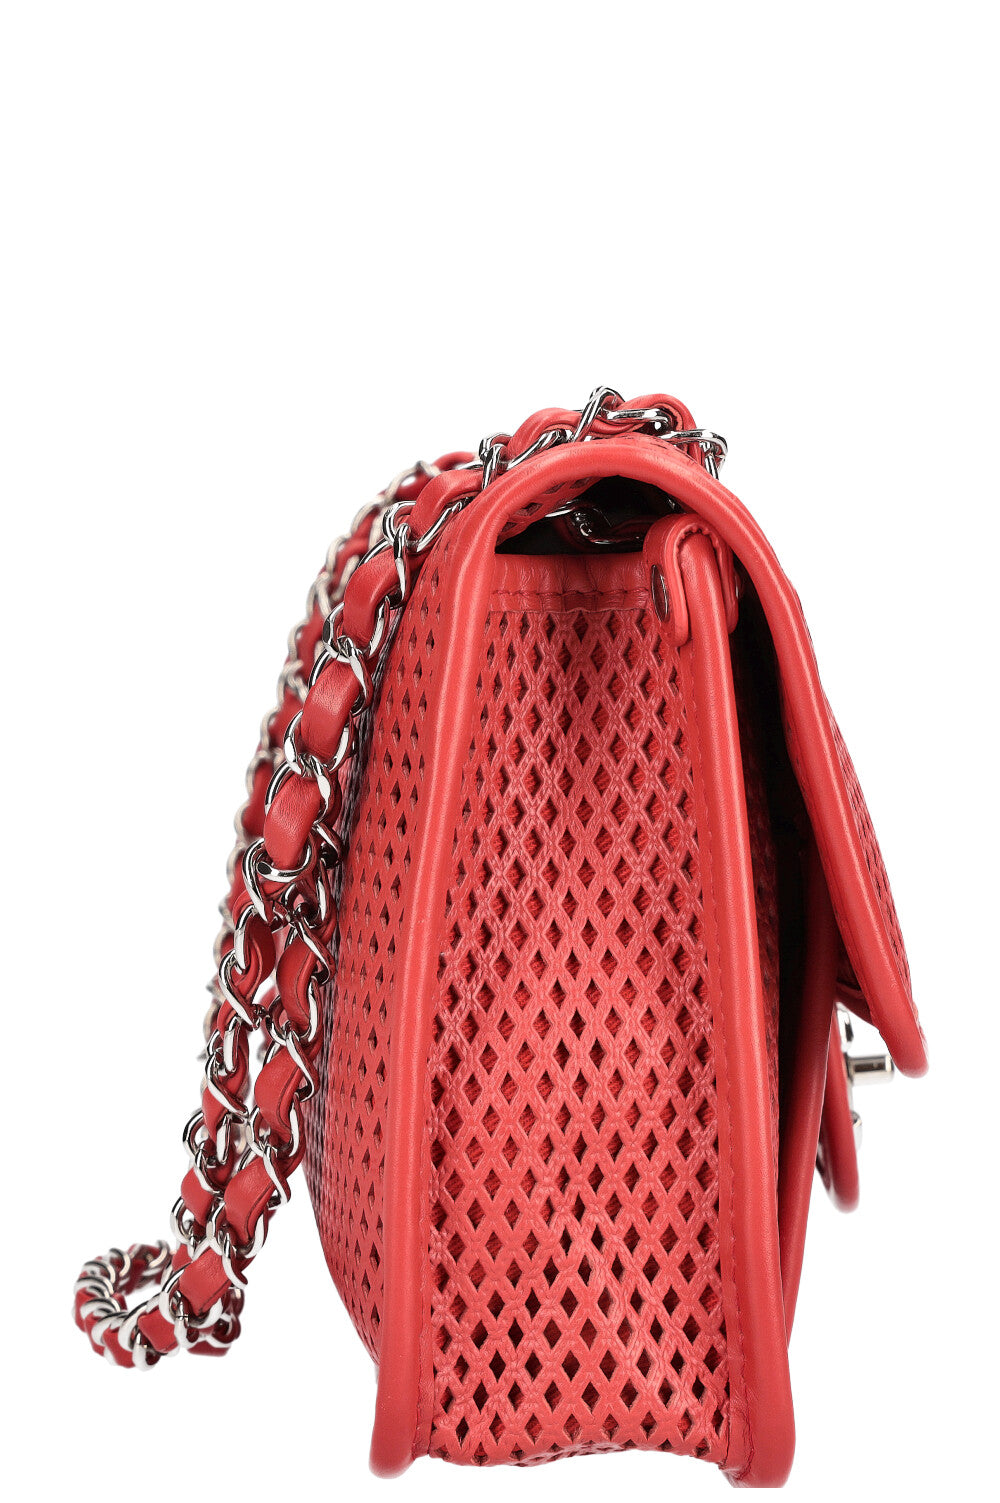 Chanel red leather crochet square mini flap bag